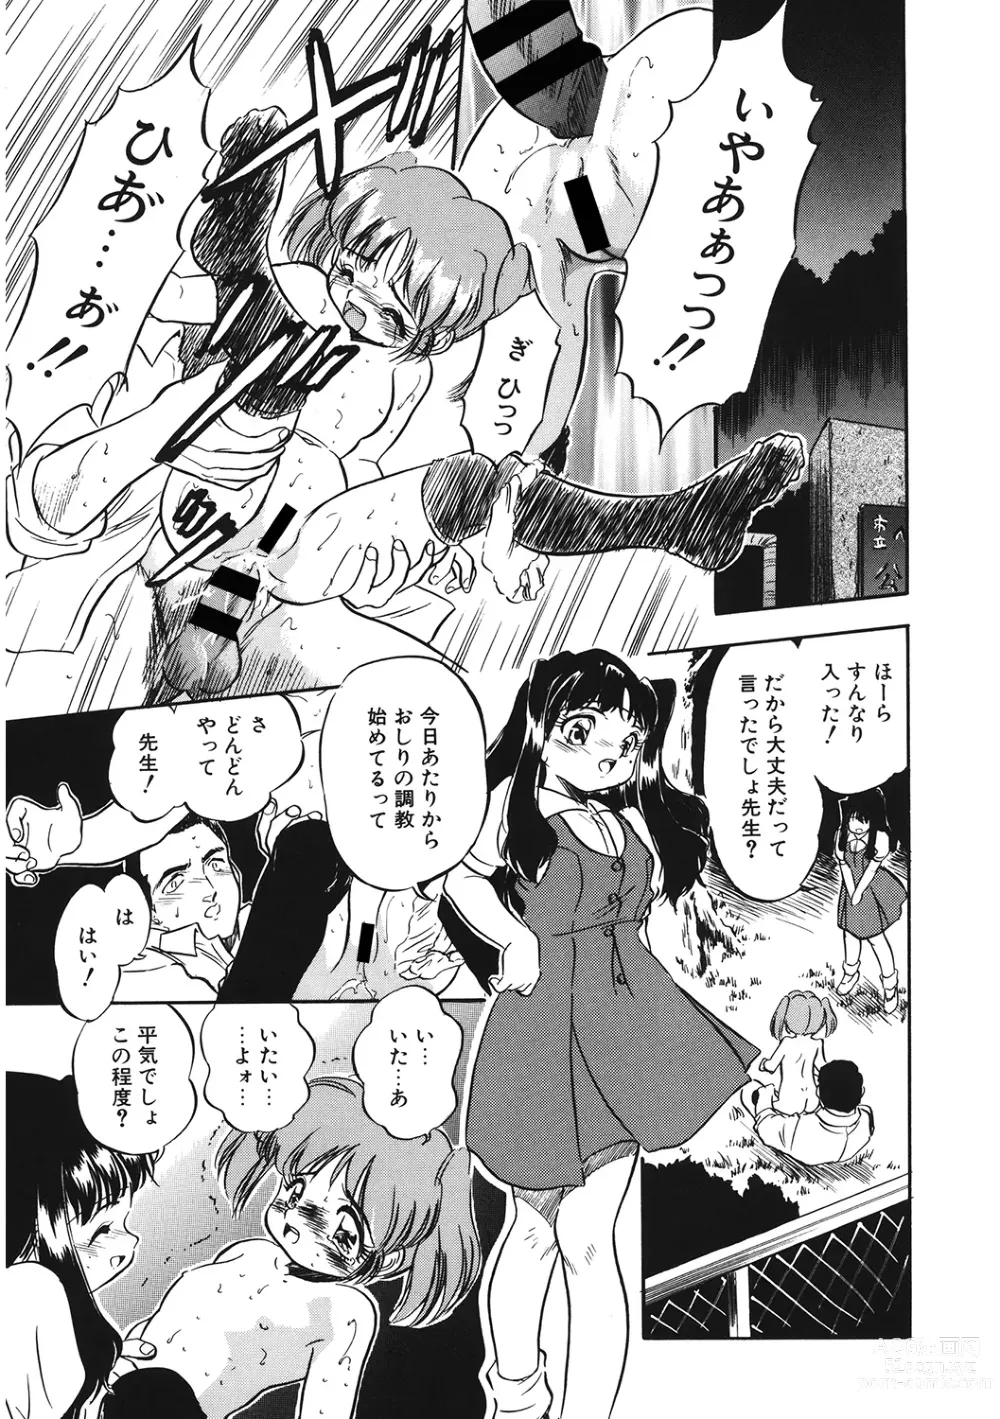 Page 19 of manga LQ -Little Queen- Vol. 52